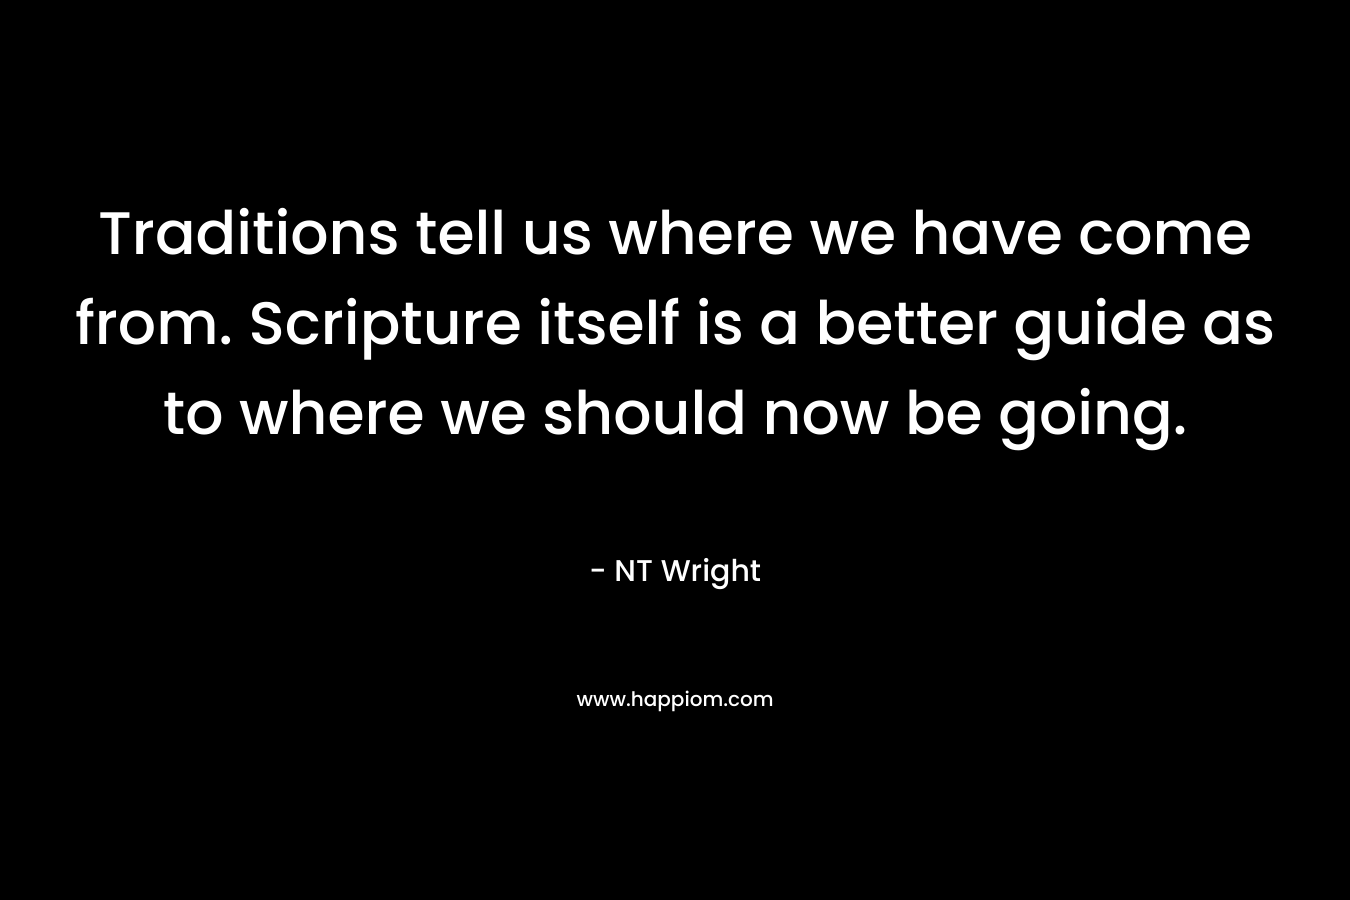 Traditions tell us where we have come from. Scripture itself is a better guide as to where we should now be going.